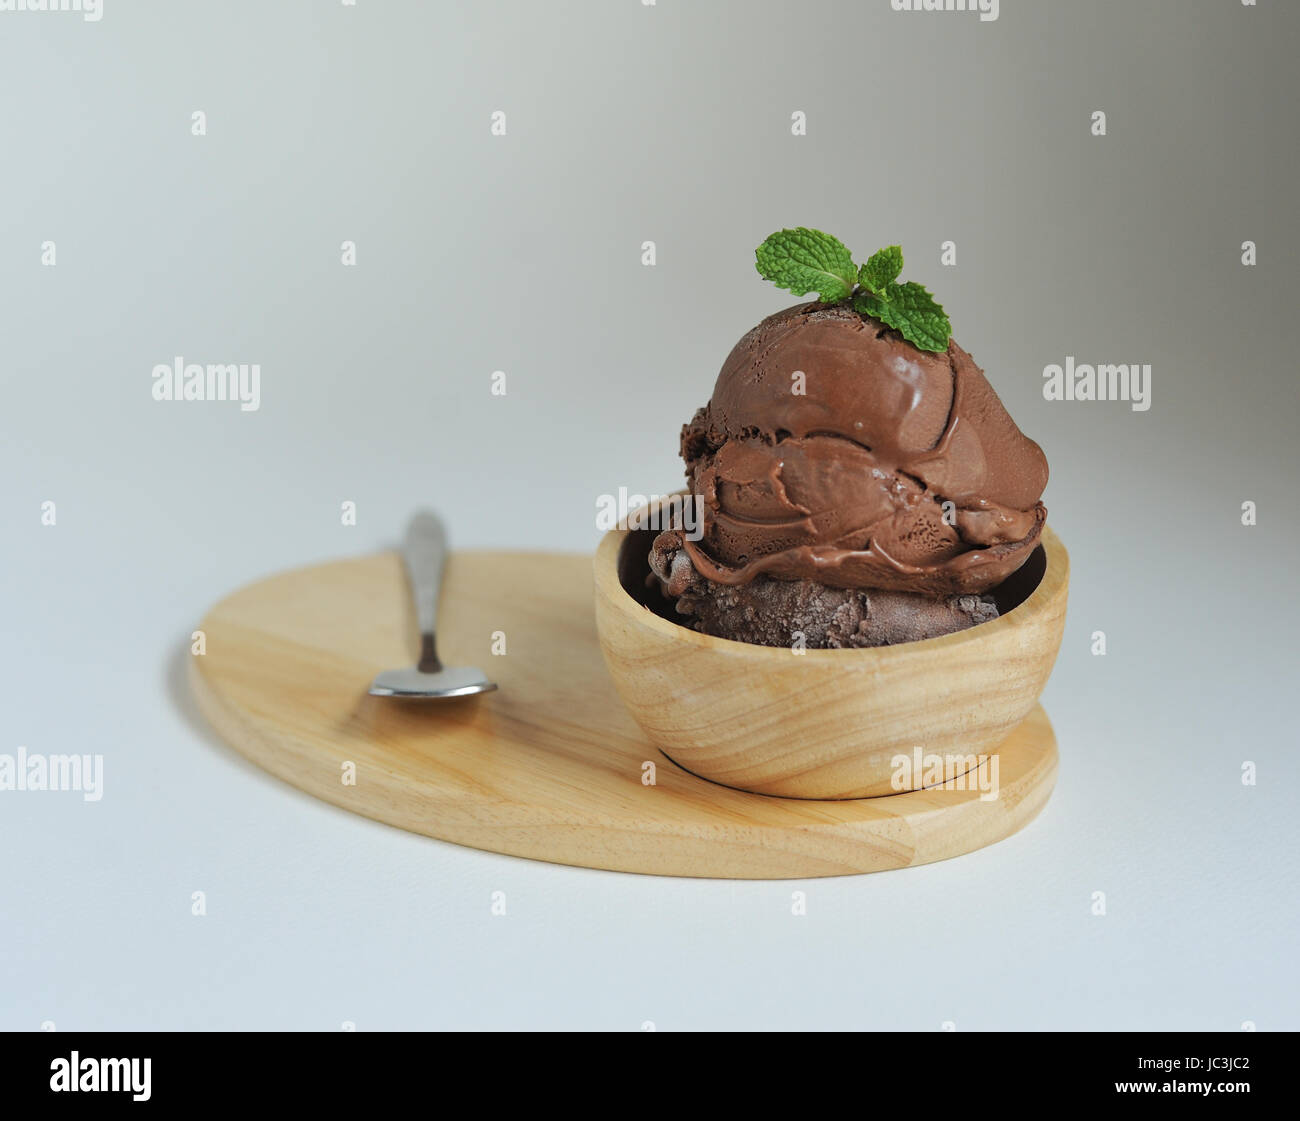 Homemade Chocolate ice cream with Mint in bowl Homemade Organic product Stock Photo